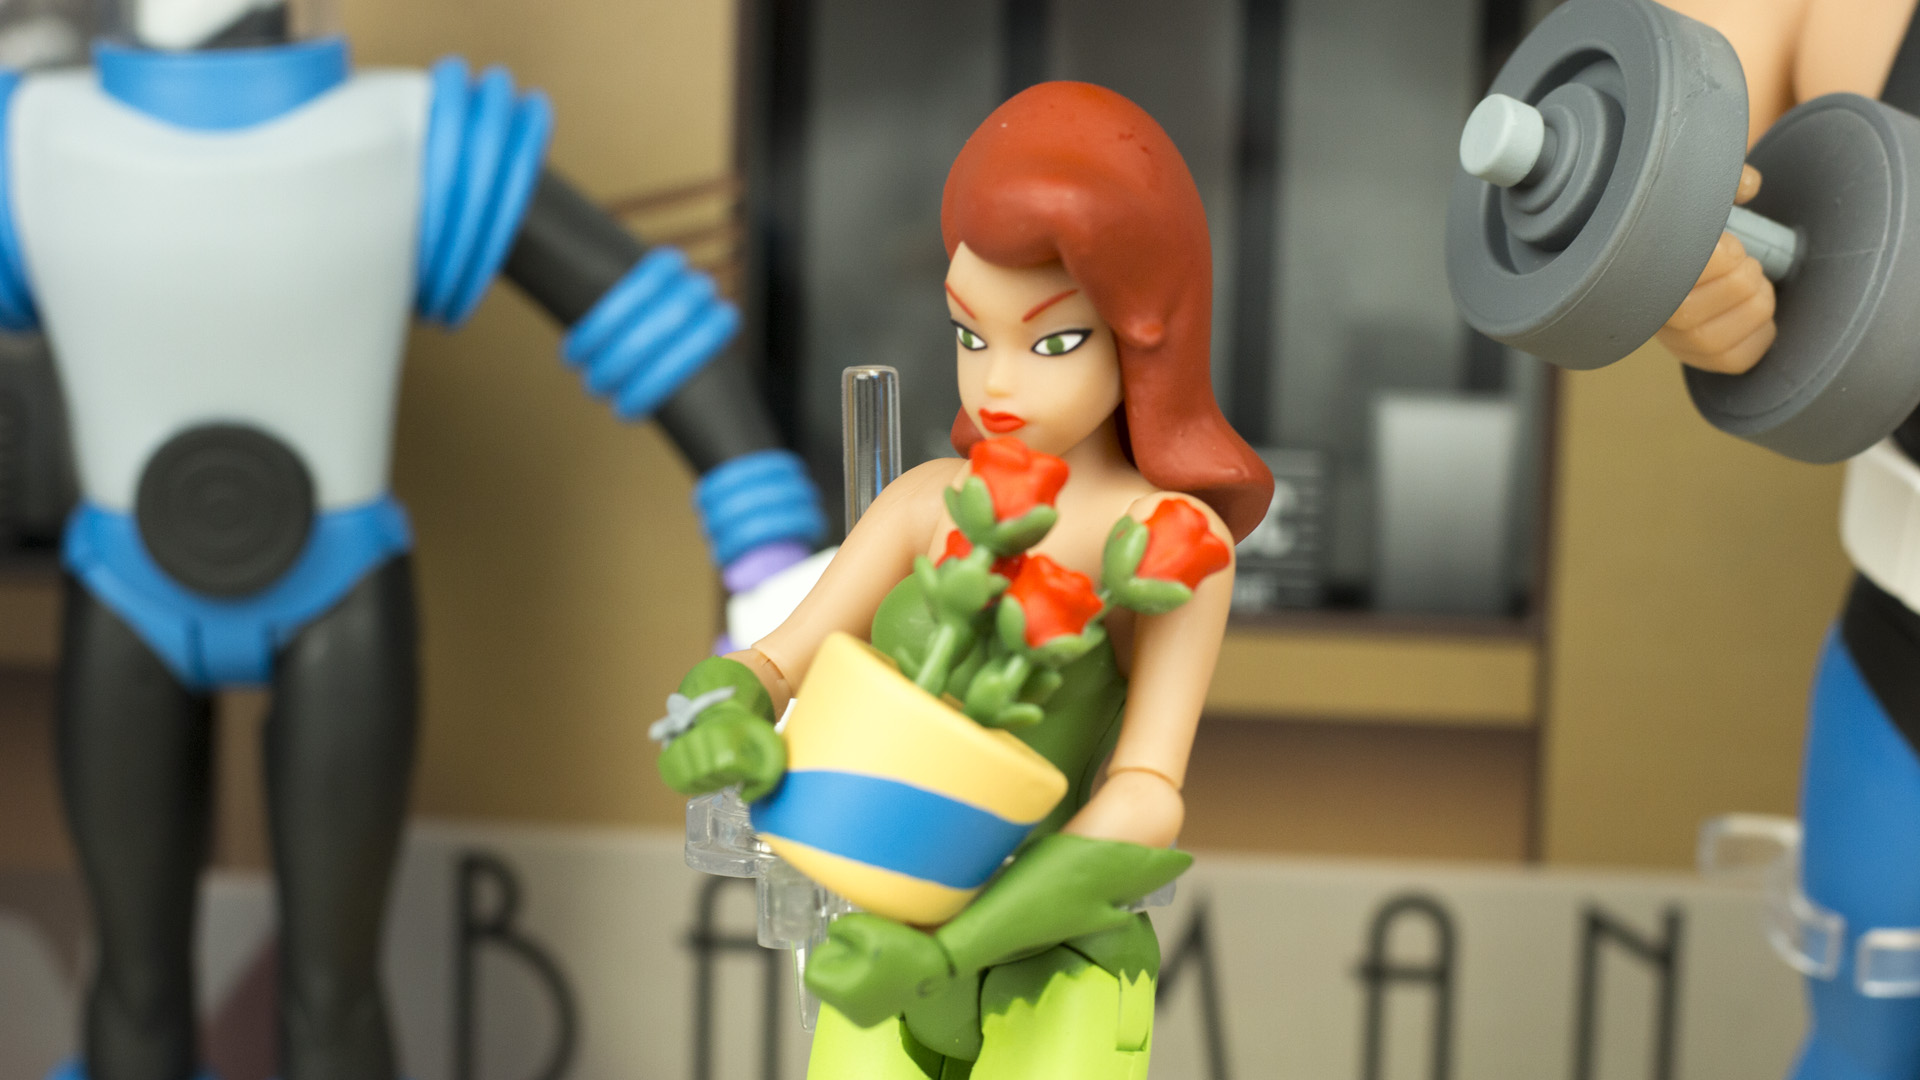 Celebrating 25 Years Of Batman: The Animated Series With A Toy Gaolbreak